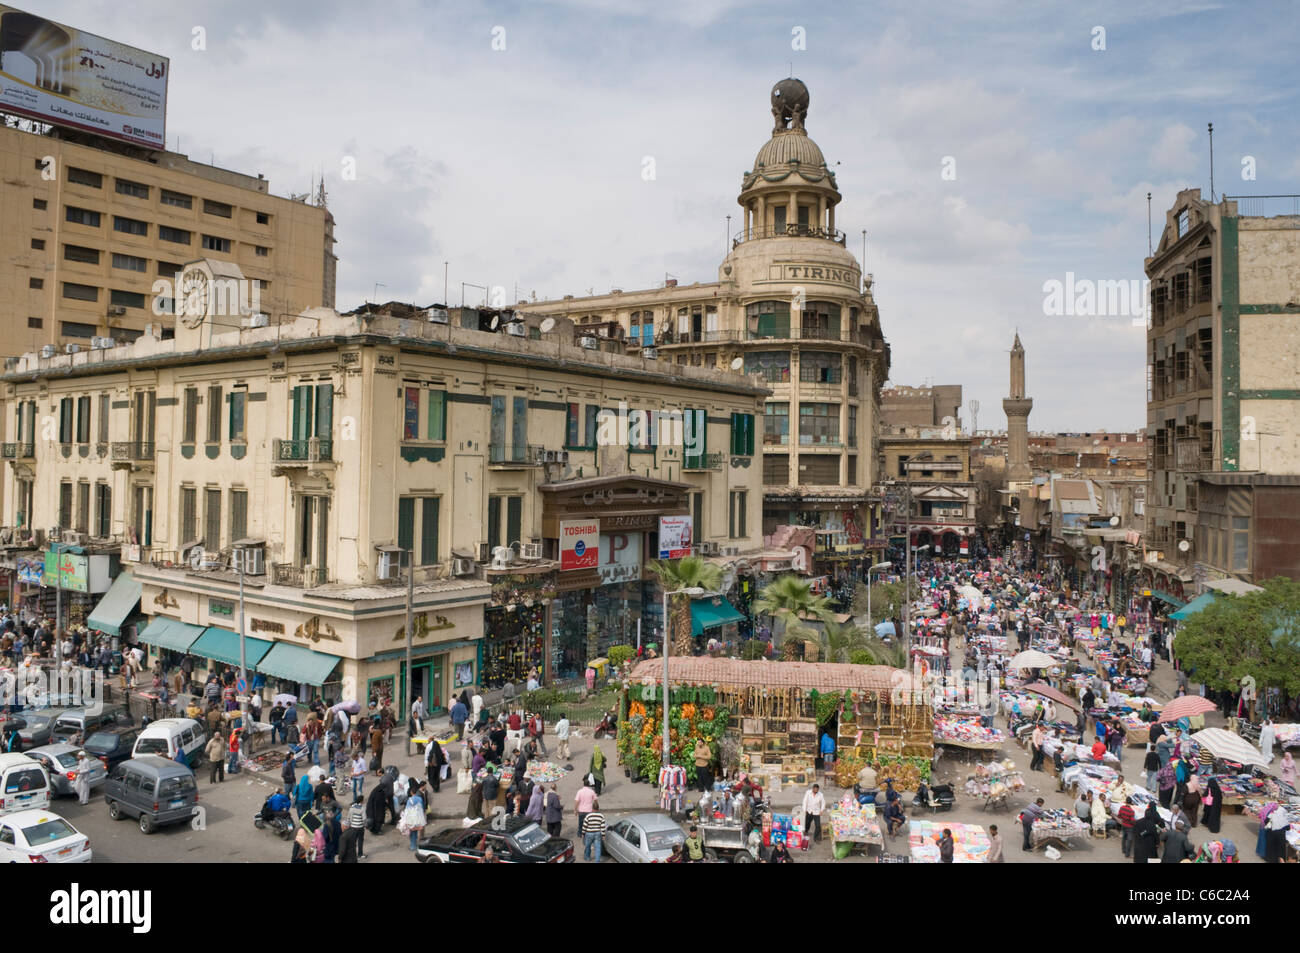 Aerial view of a typical neighbourhood souk in Cairo Egypt Stock Photo